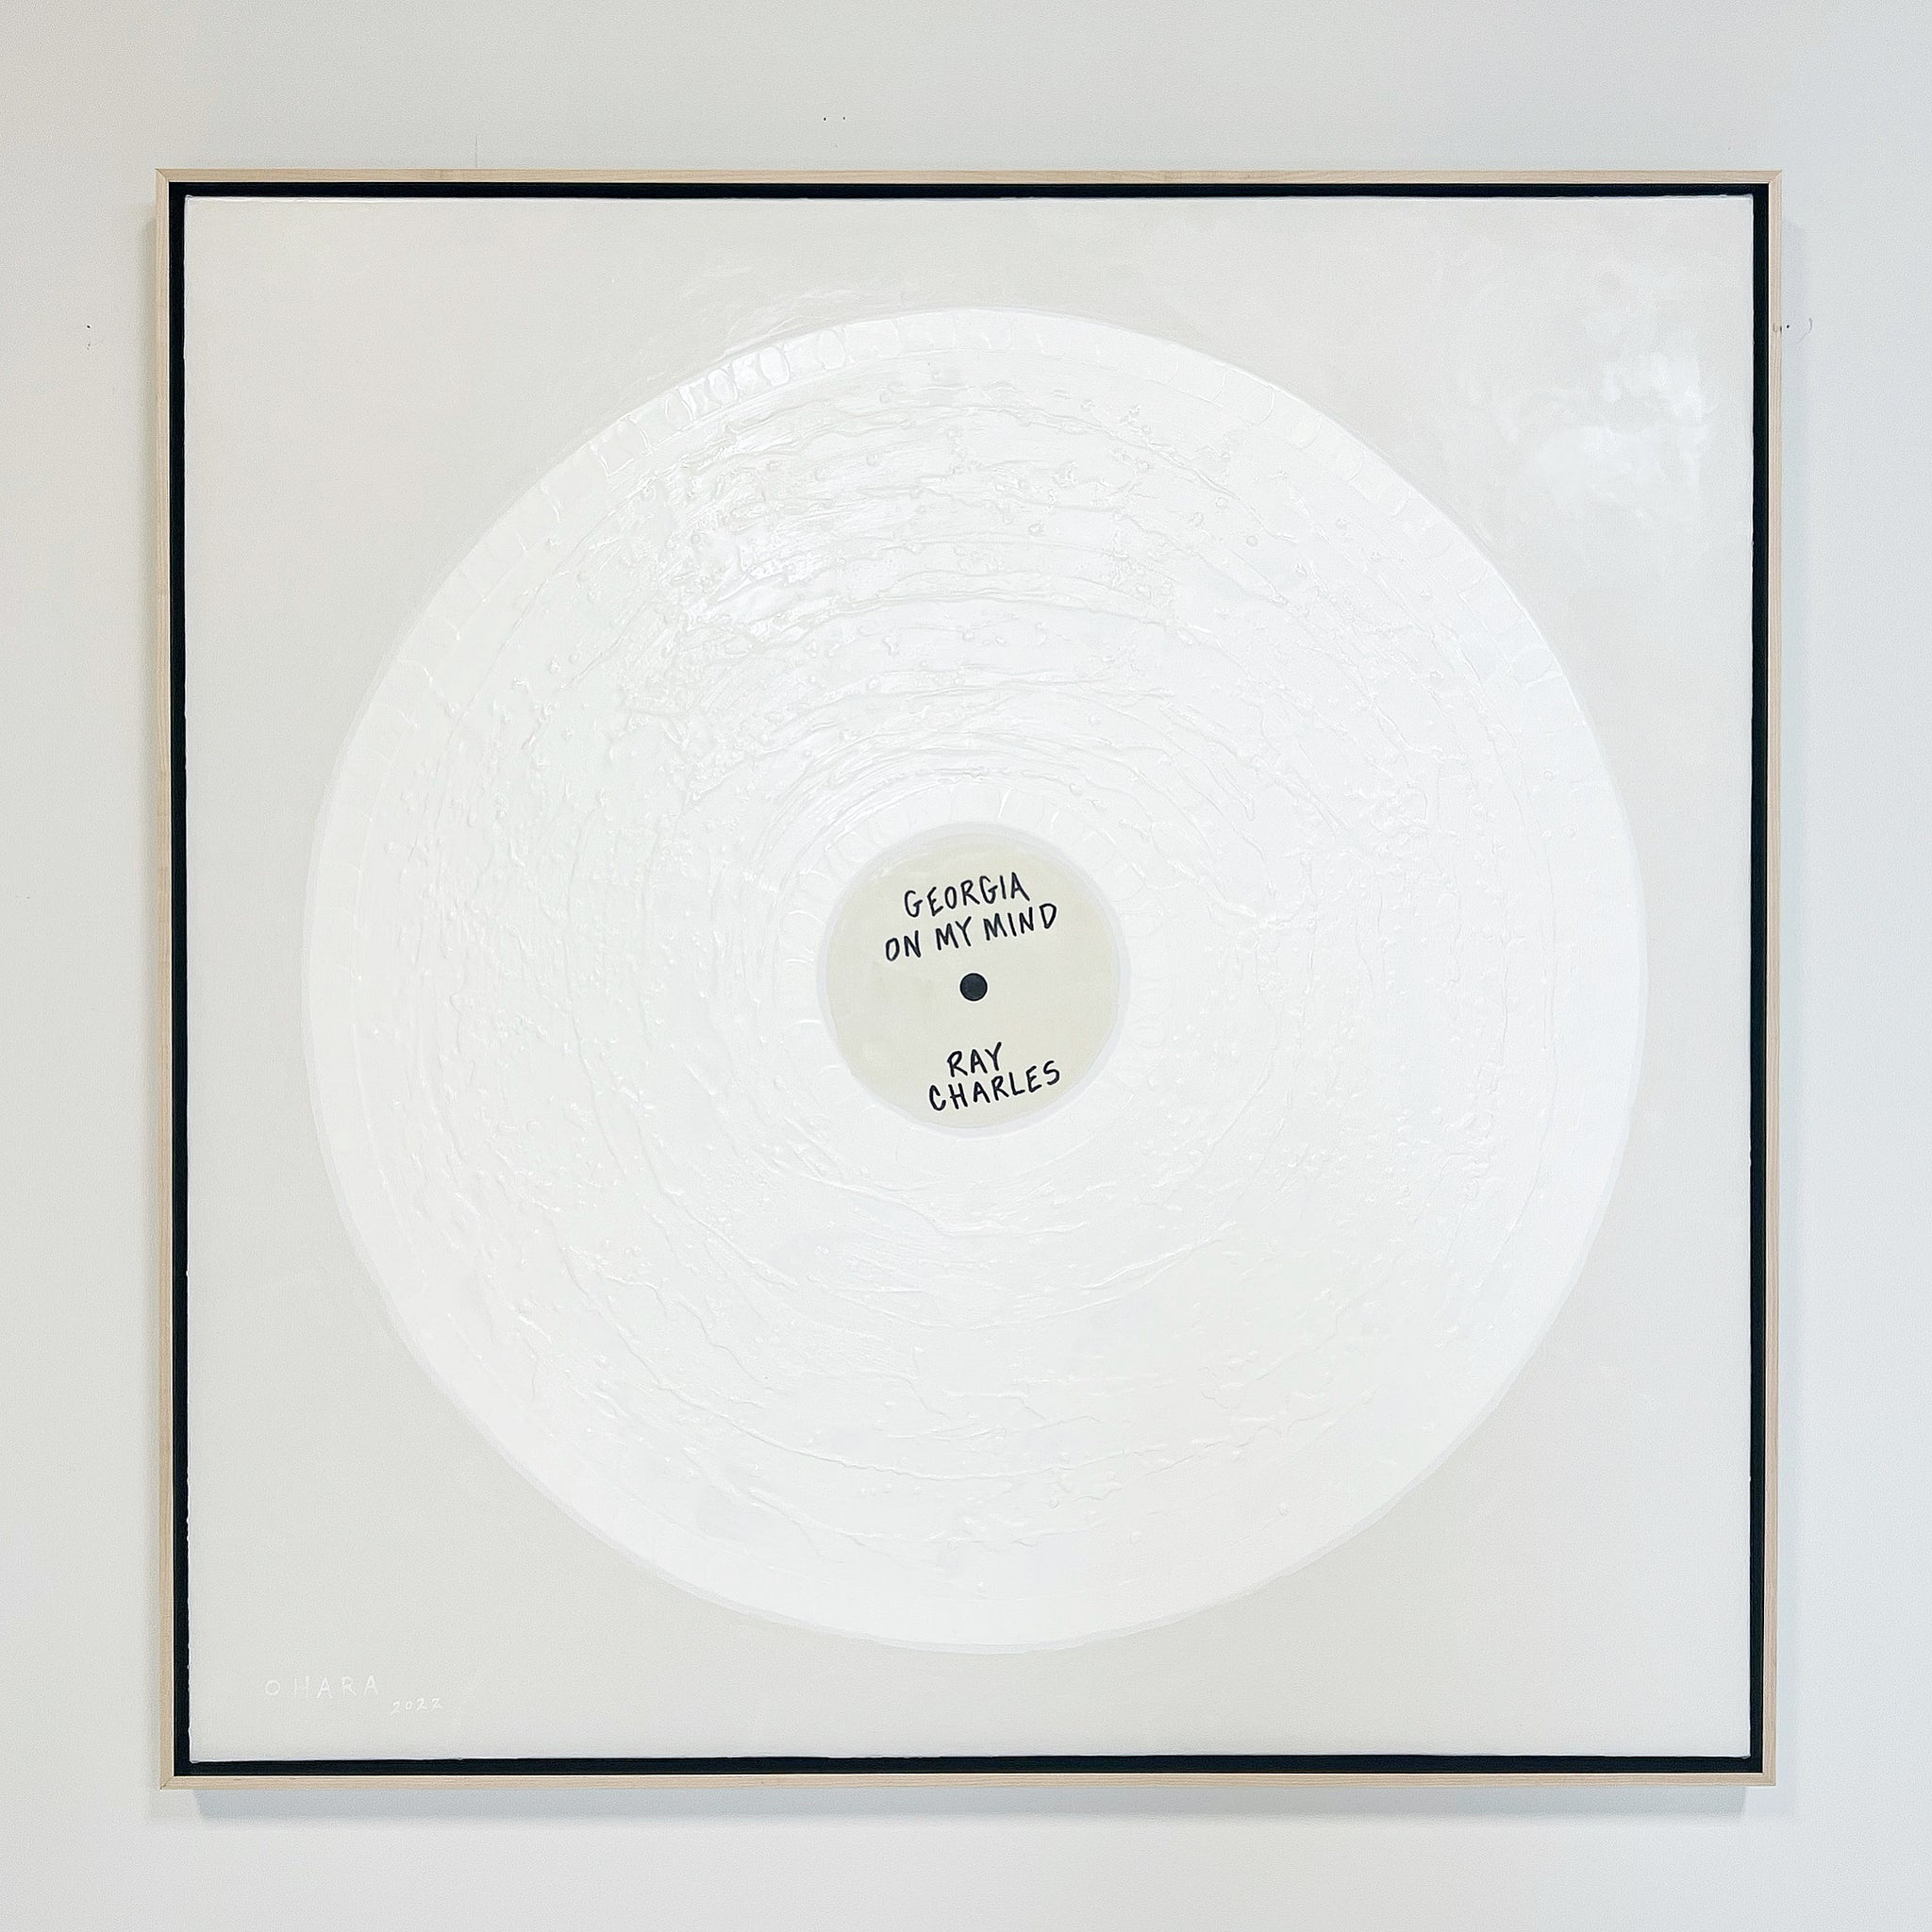 5' Vinyl in White, Your Favorite Song, Commission